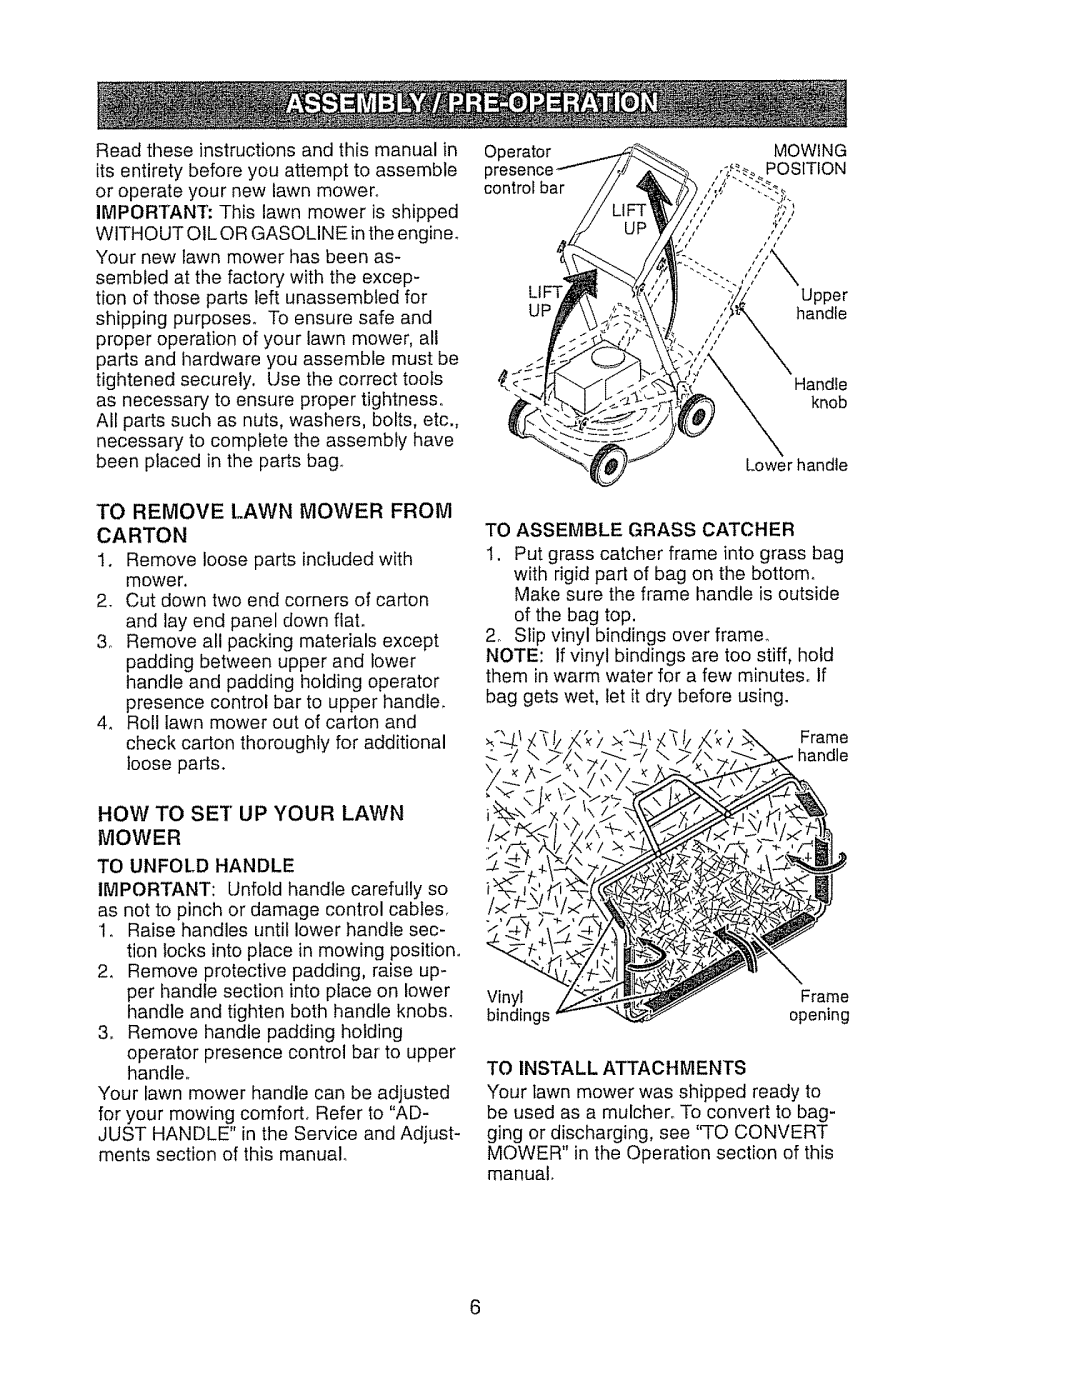 Craftsman 917.388191 manual How To Set Up Your Lawn Mower 